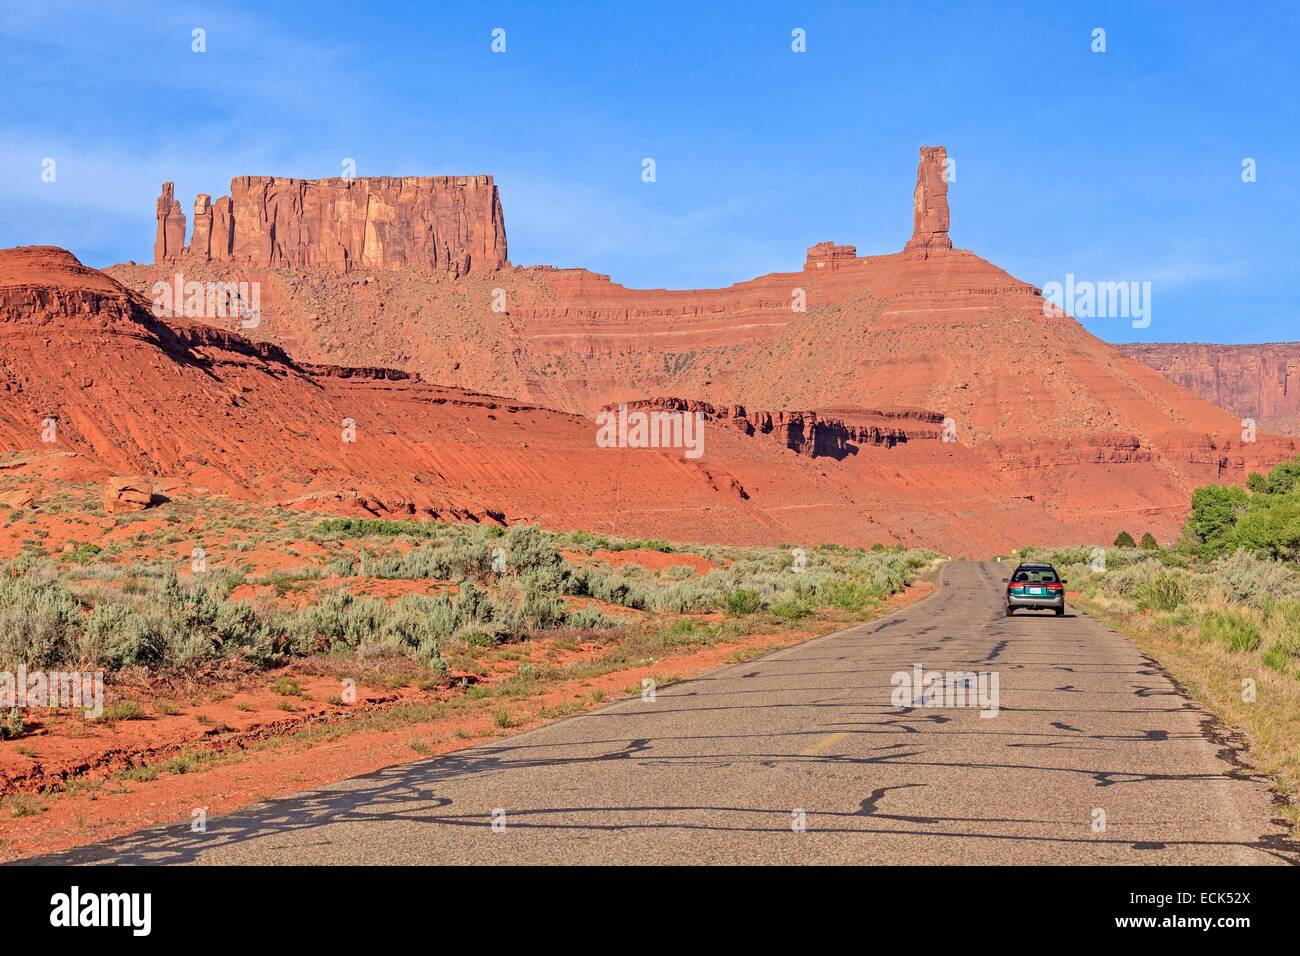 United States, Utah, Colorado Plateau, Castle Valley east of Moab, Castletown Tower (right) and The Rectory (left), Castletown Tower is world renowned for its classic rock climbing routes, the most famous of which is the Kor-Ingalls Route featured in the Stock Photo